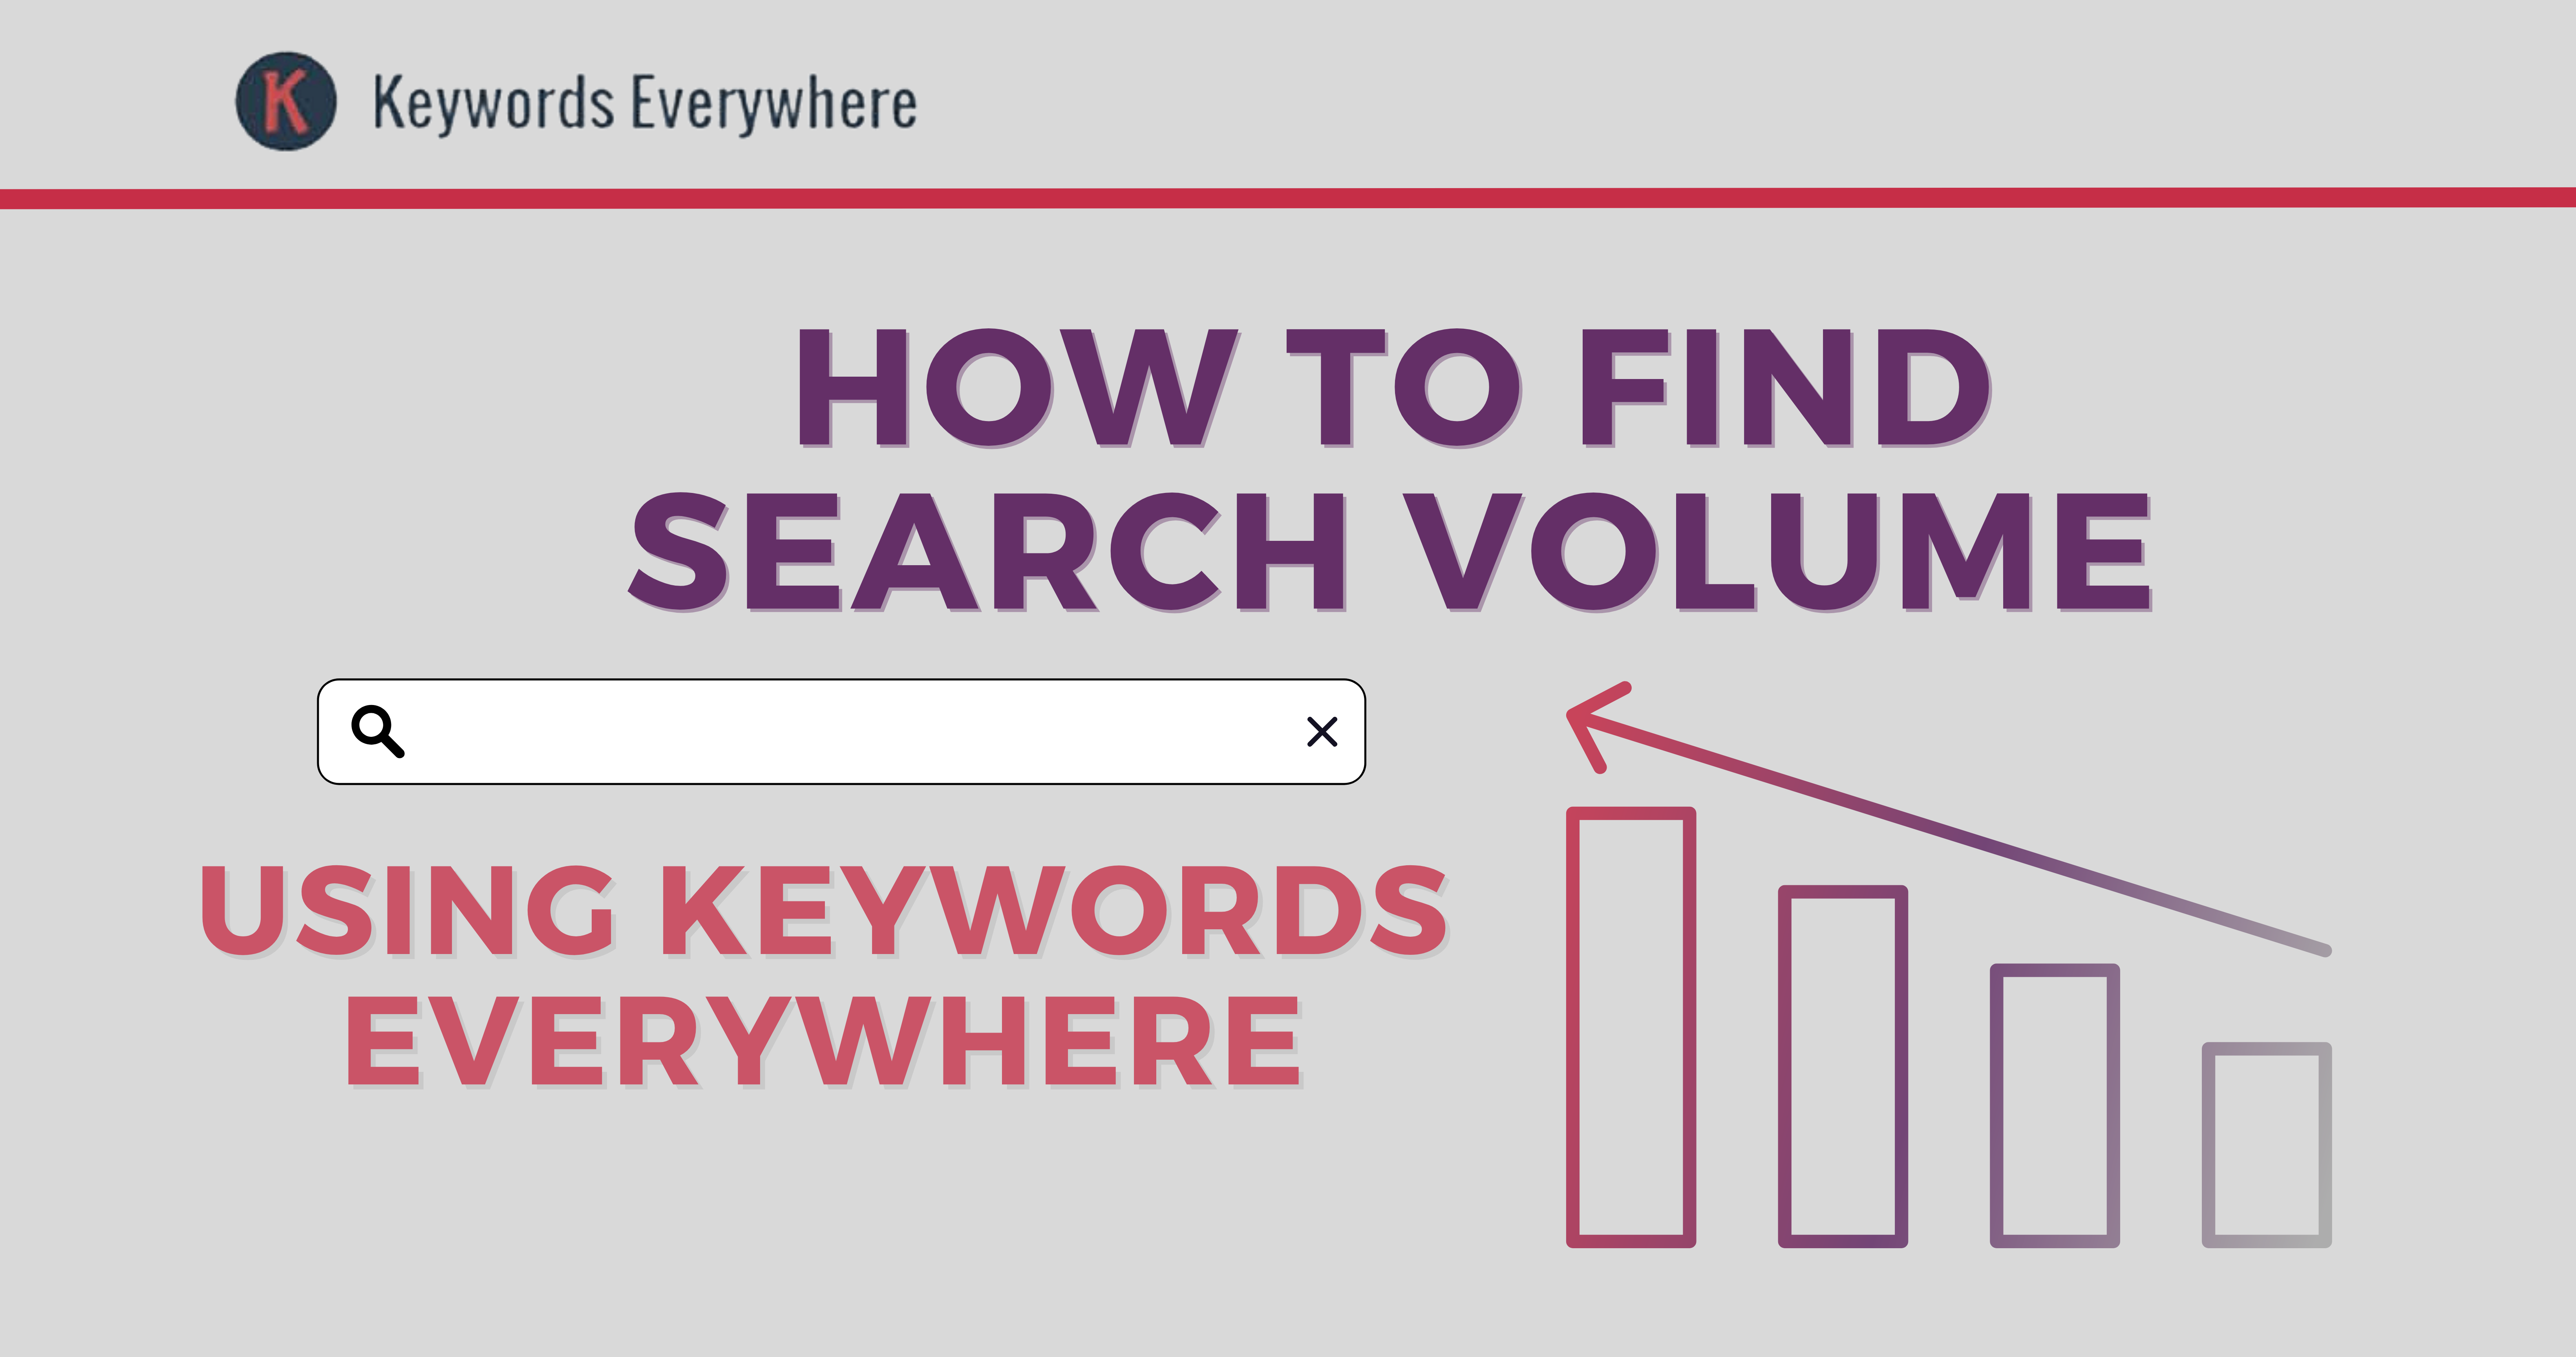 How to Find Search Volume Using Keywords Everywhere